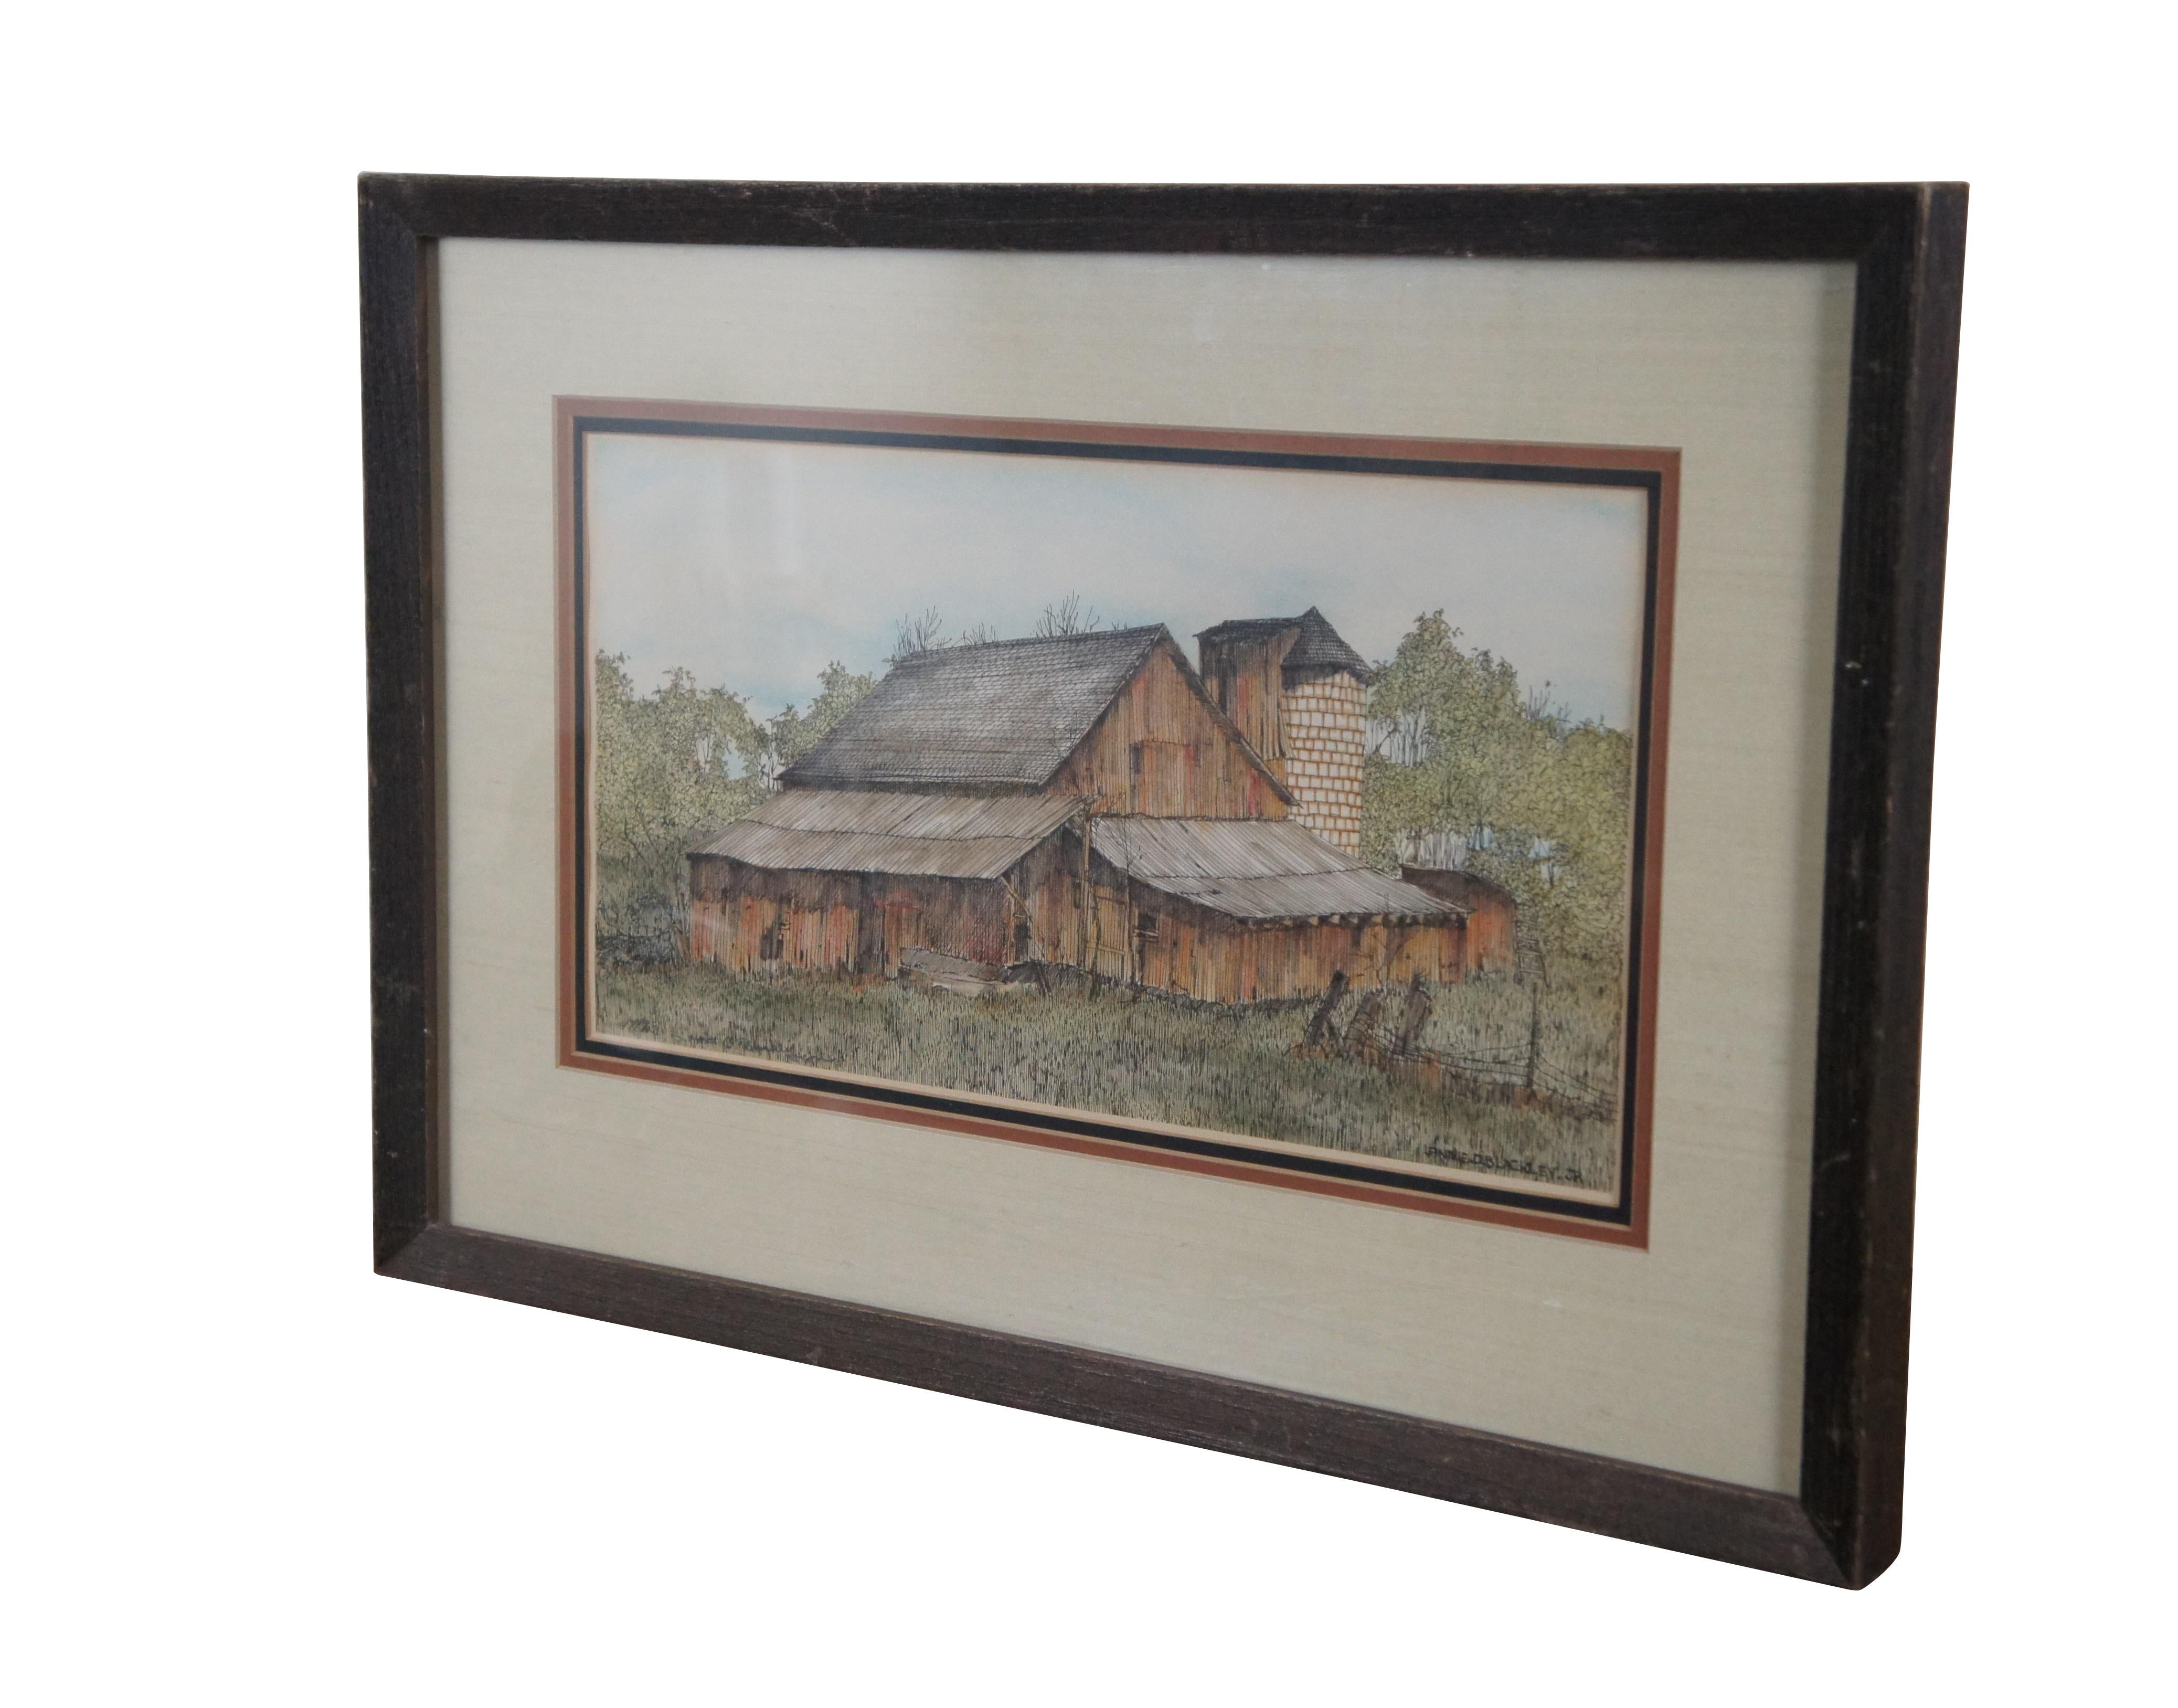 A beautiful hand colored lithograph print by Lonnie C. Blackley, Jr, showing a large, red, dilapidated barn and silo in a country farmhouse landscape  Pencil signed and numbered 17/25 in lower left. Rustic wood frame, black, red, and white triple